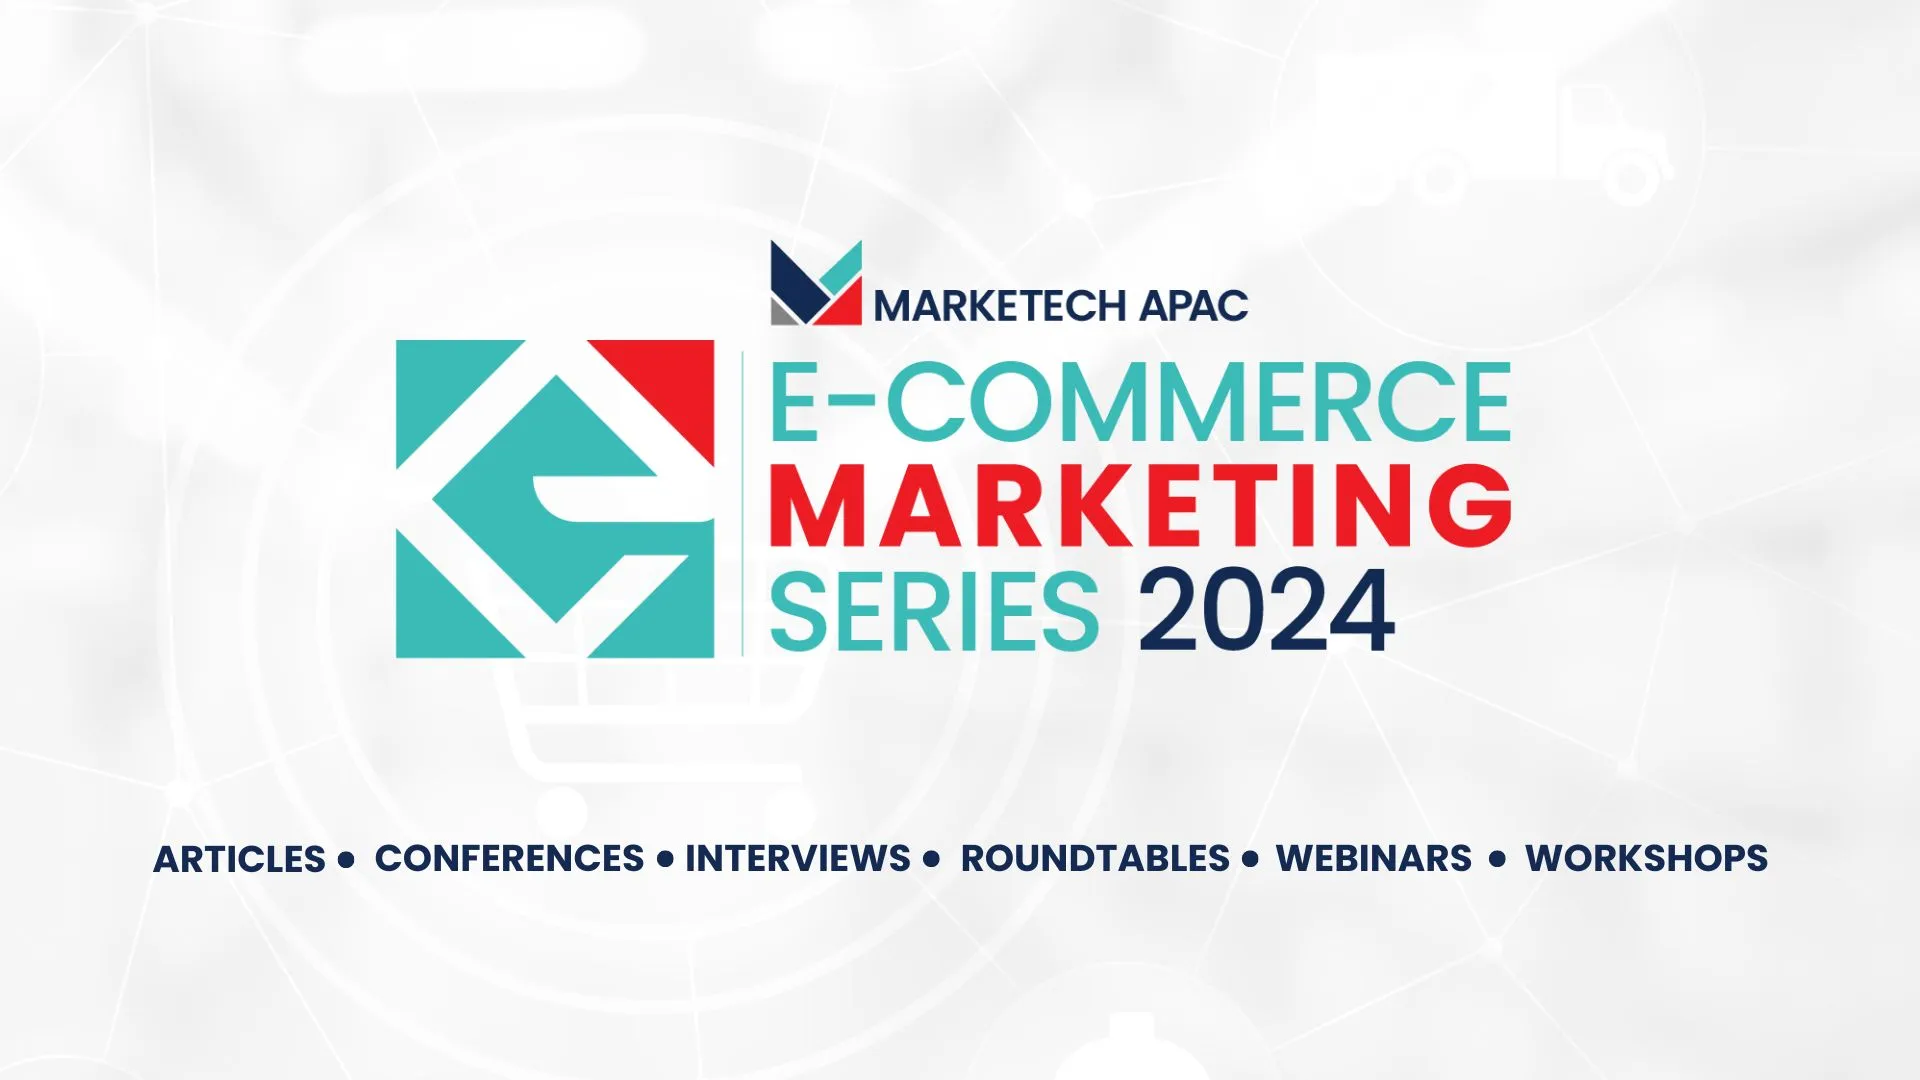 MARKETECH APAC empowers businesses on future of online commerce with launch of inaugural ‘E-Commerce Marketing Series’